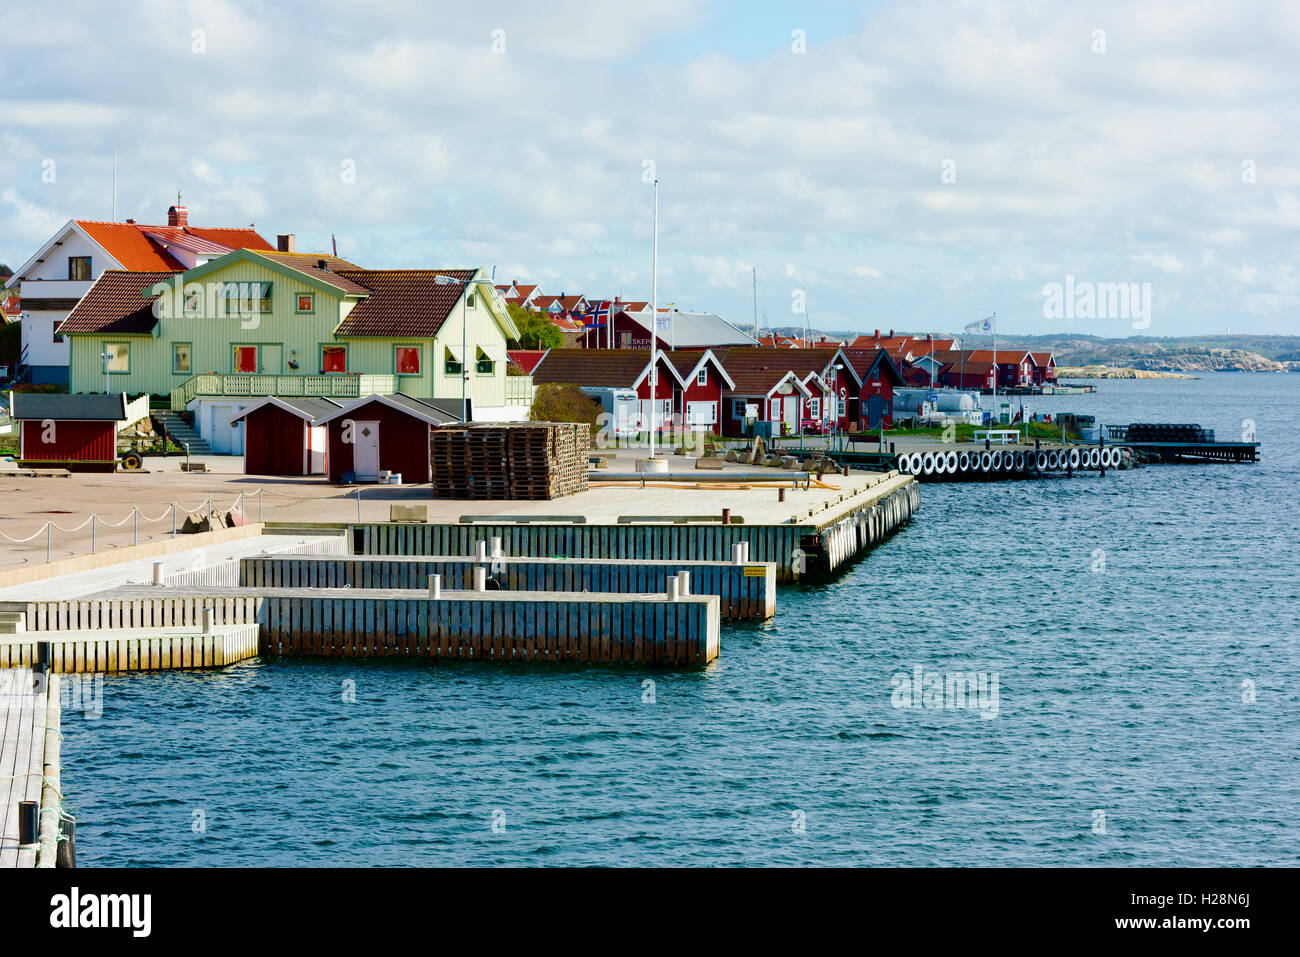 Mollosund, Sweden - September 9, 2016: Environmental documentary of the coastal city as seen from the lighthouse looking to the Stock Photo